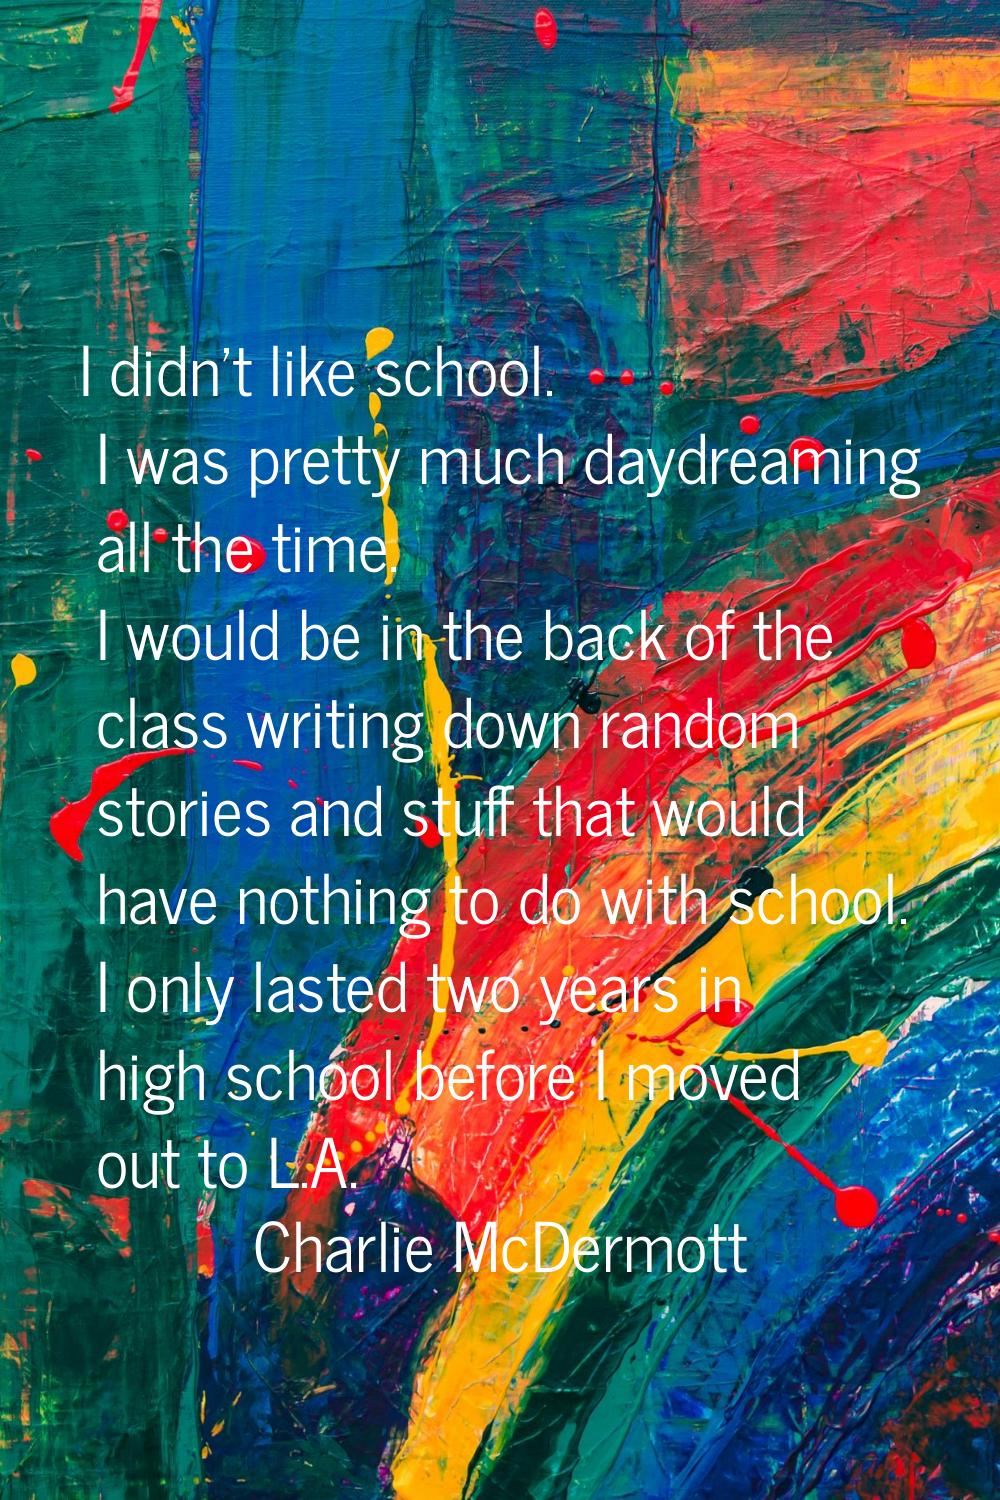 I didn't like school. I was pretty much daydreaming all the time. I would be in the back of the cla